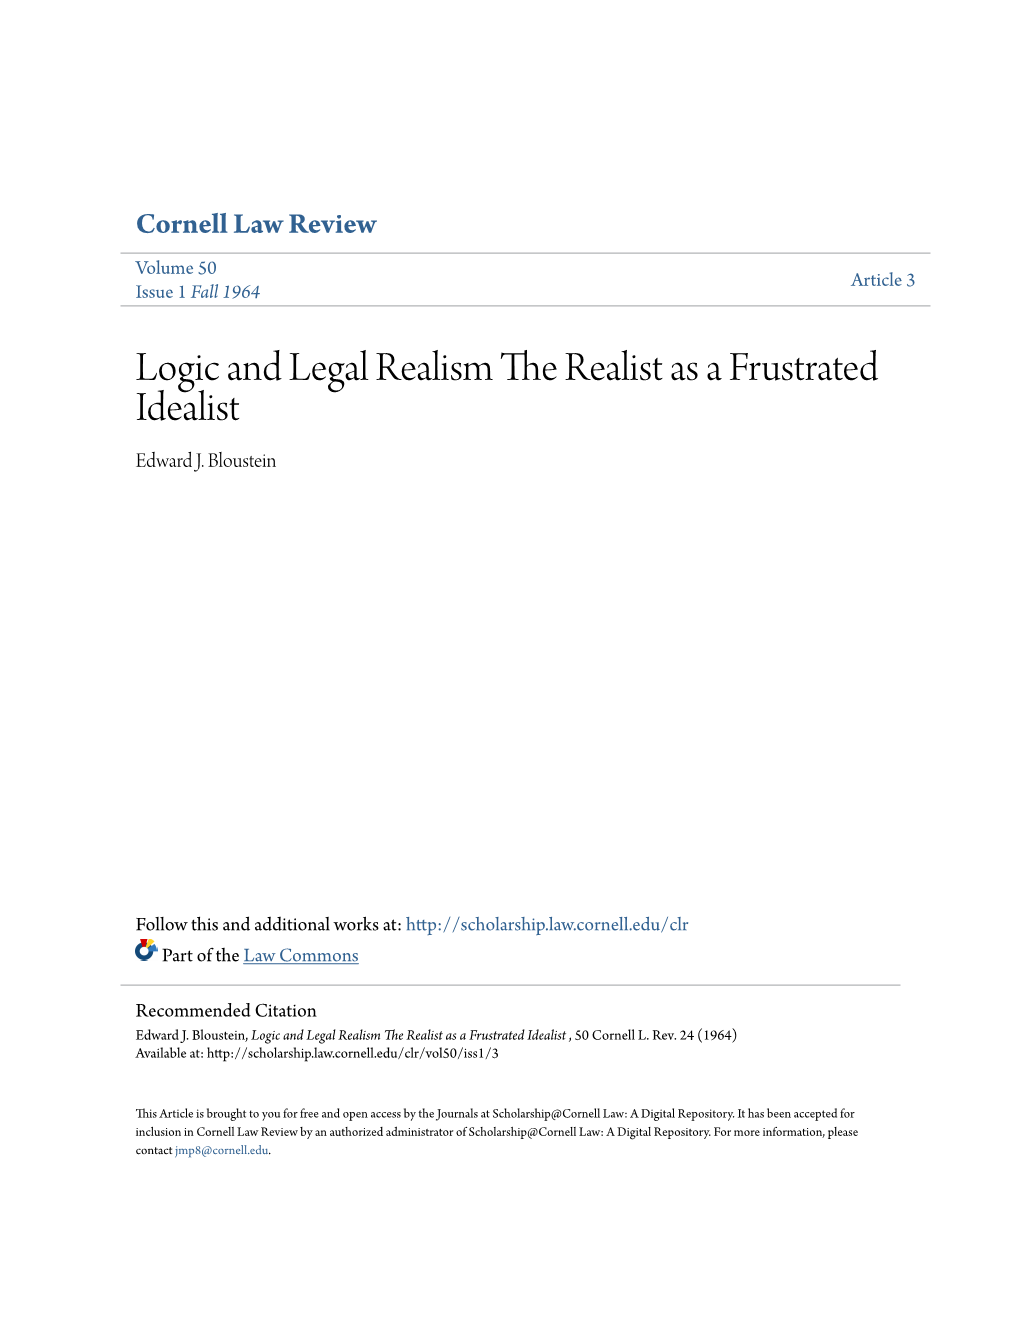 Logic and Legal Realism the Realist As a Frustrated Idealist Edward J